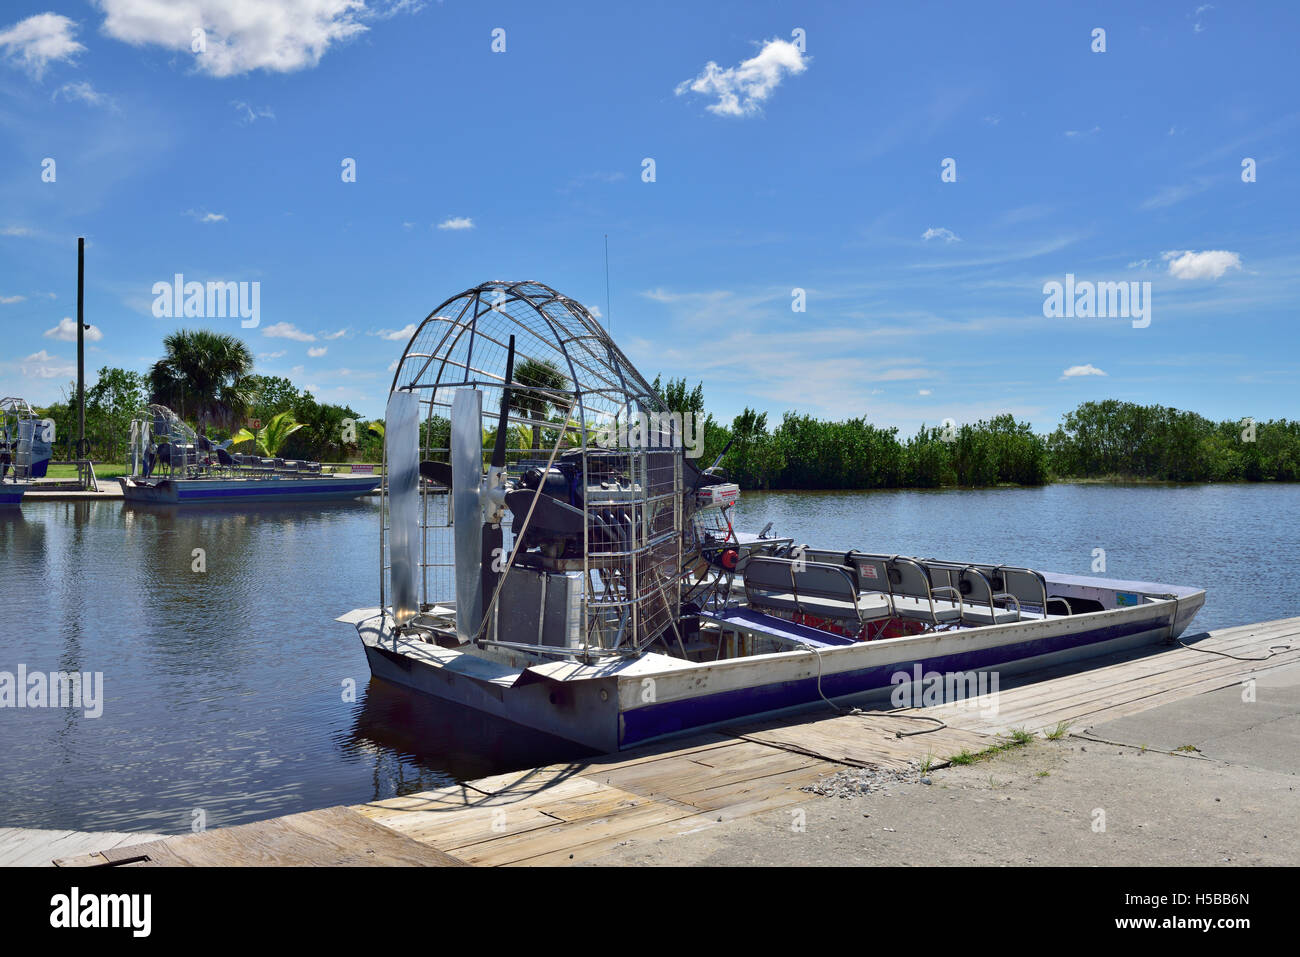 Airboats attraccata a Wooten's Everglades Airboat Tours in Everglades National Park, Florida, Stati Uniti d'America Foto Stock